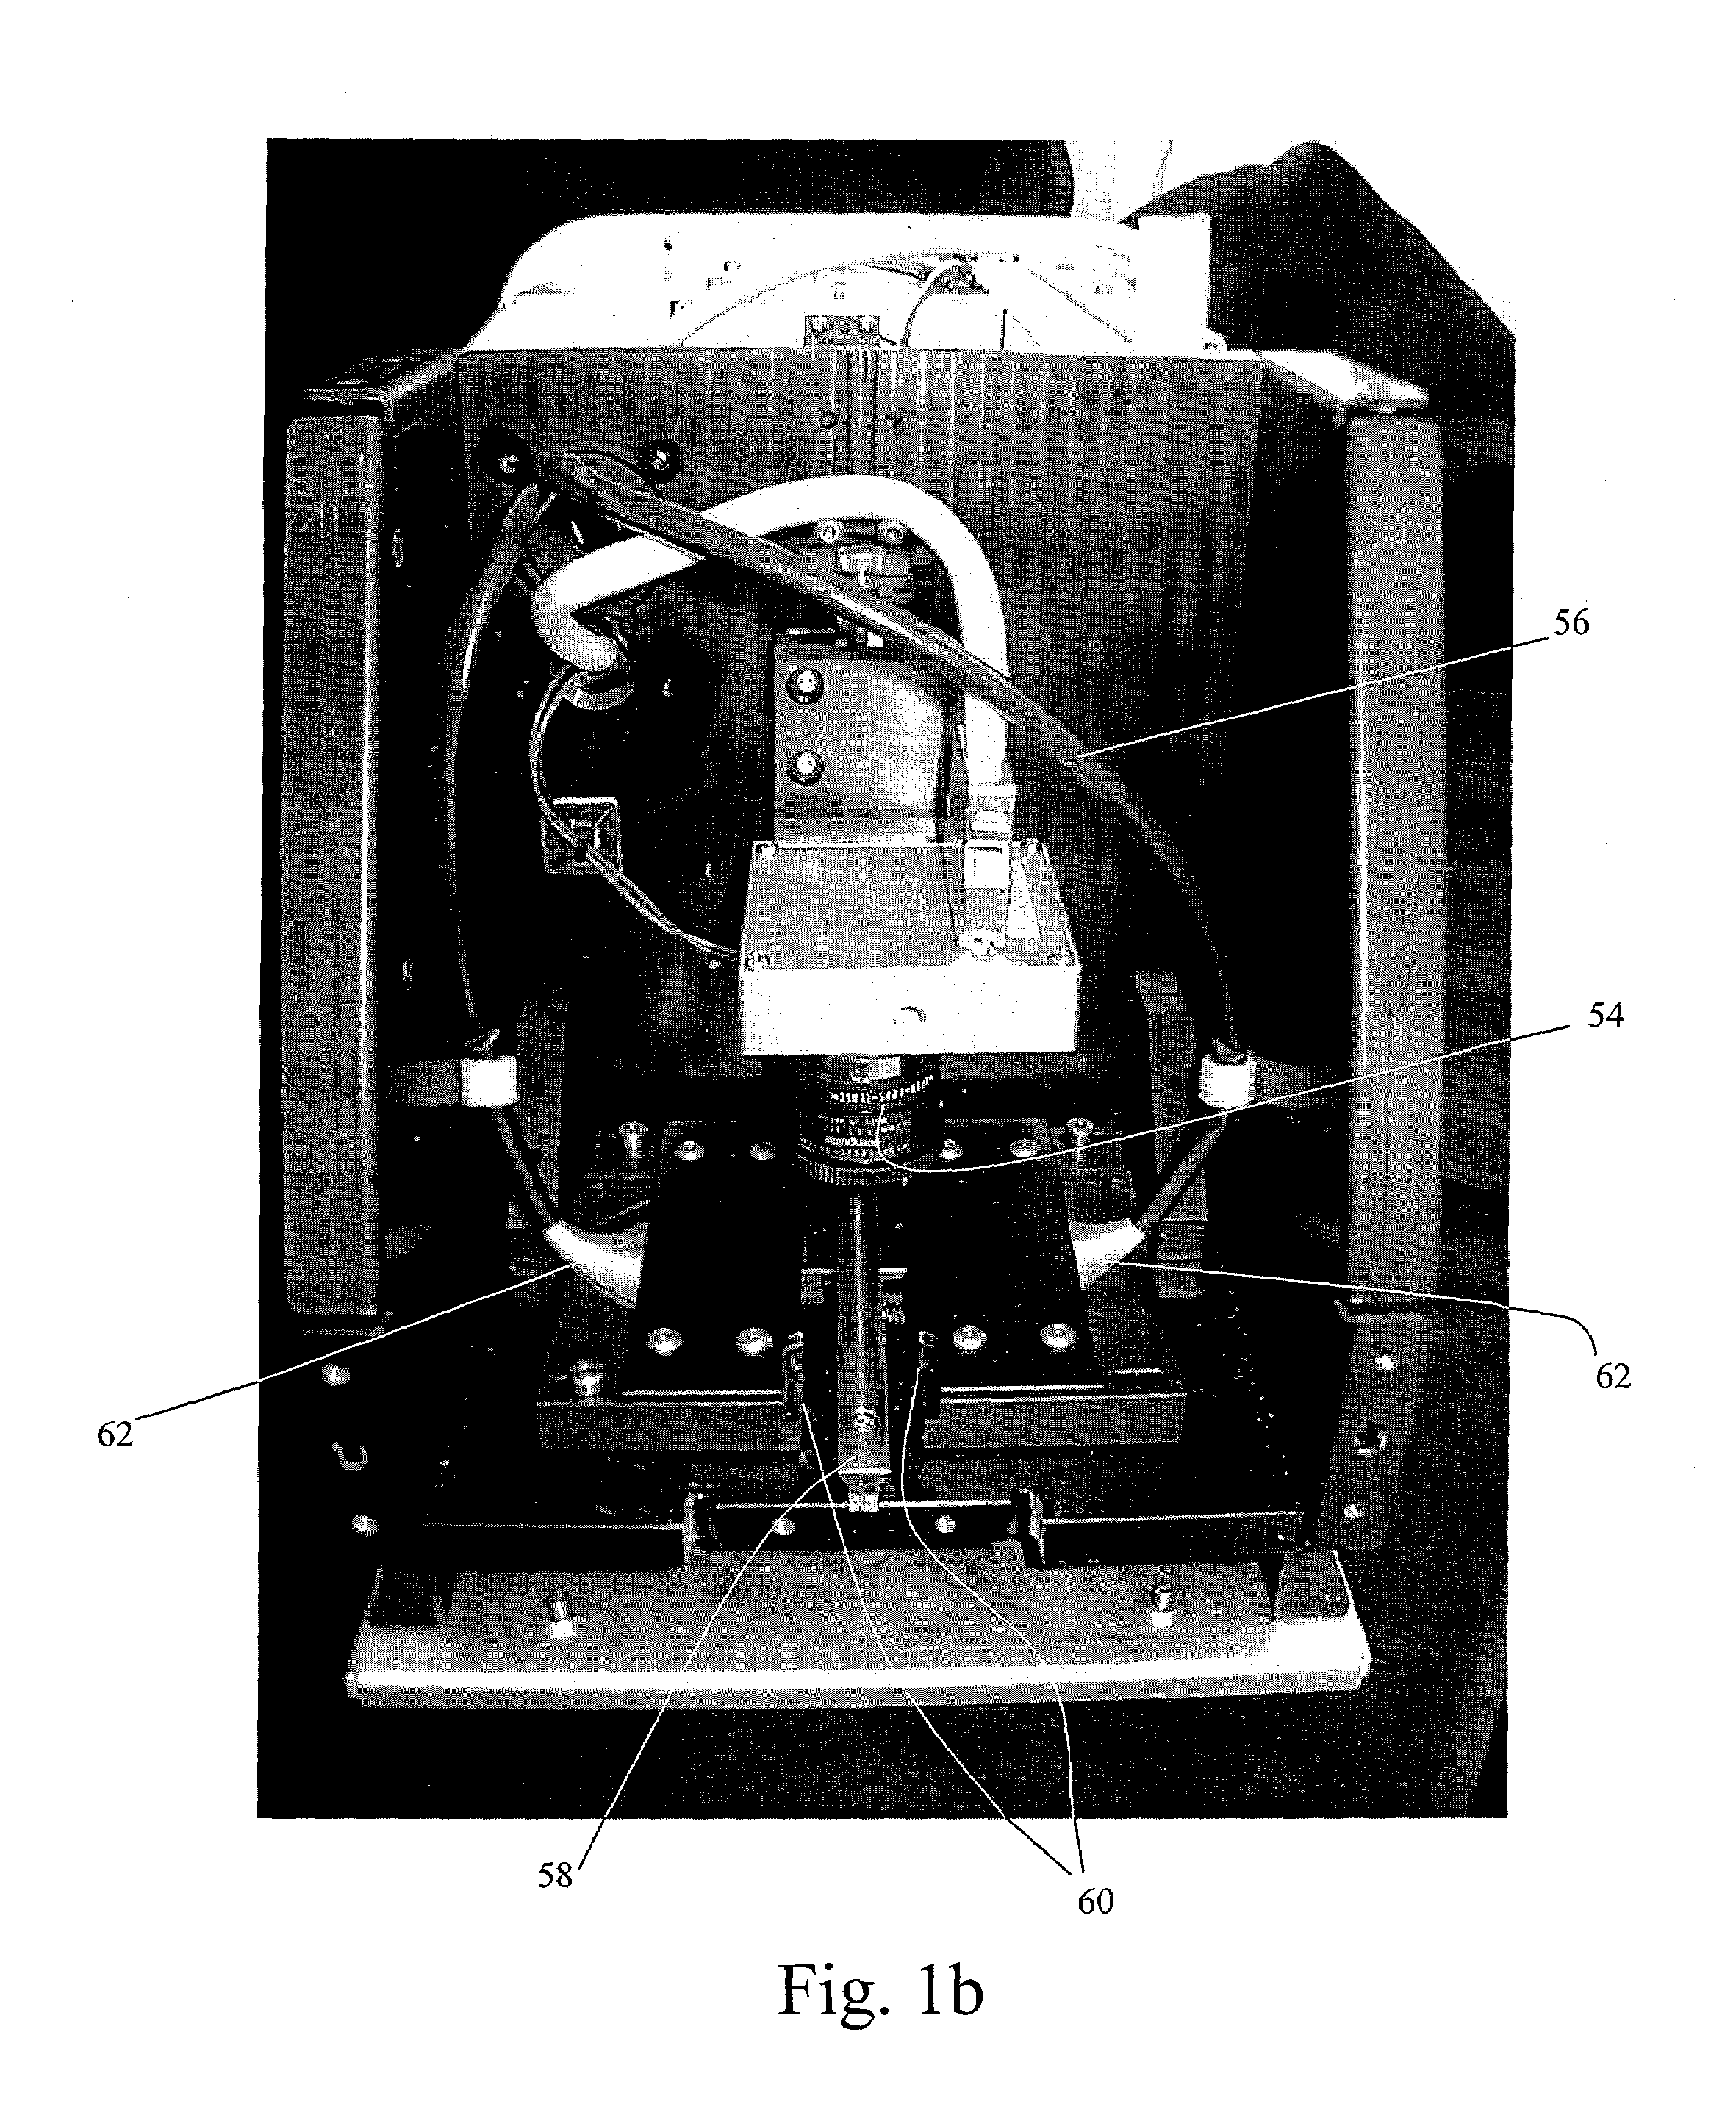 Nanoparticle imaging system and method